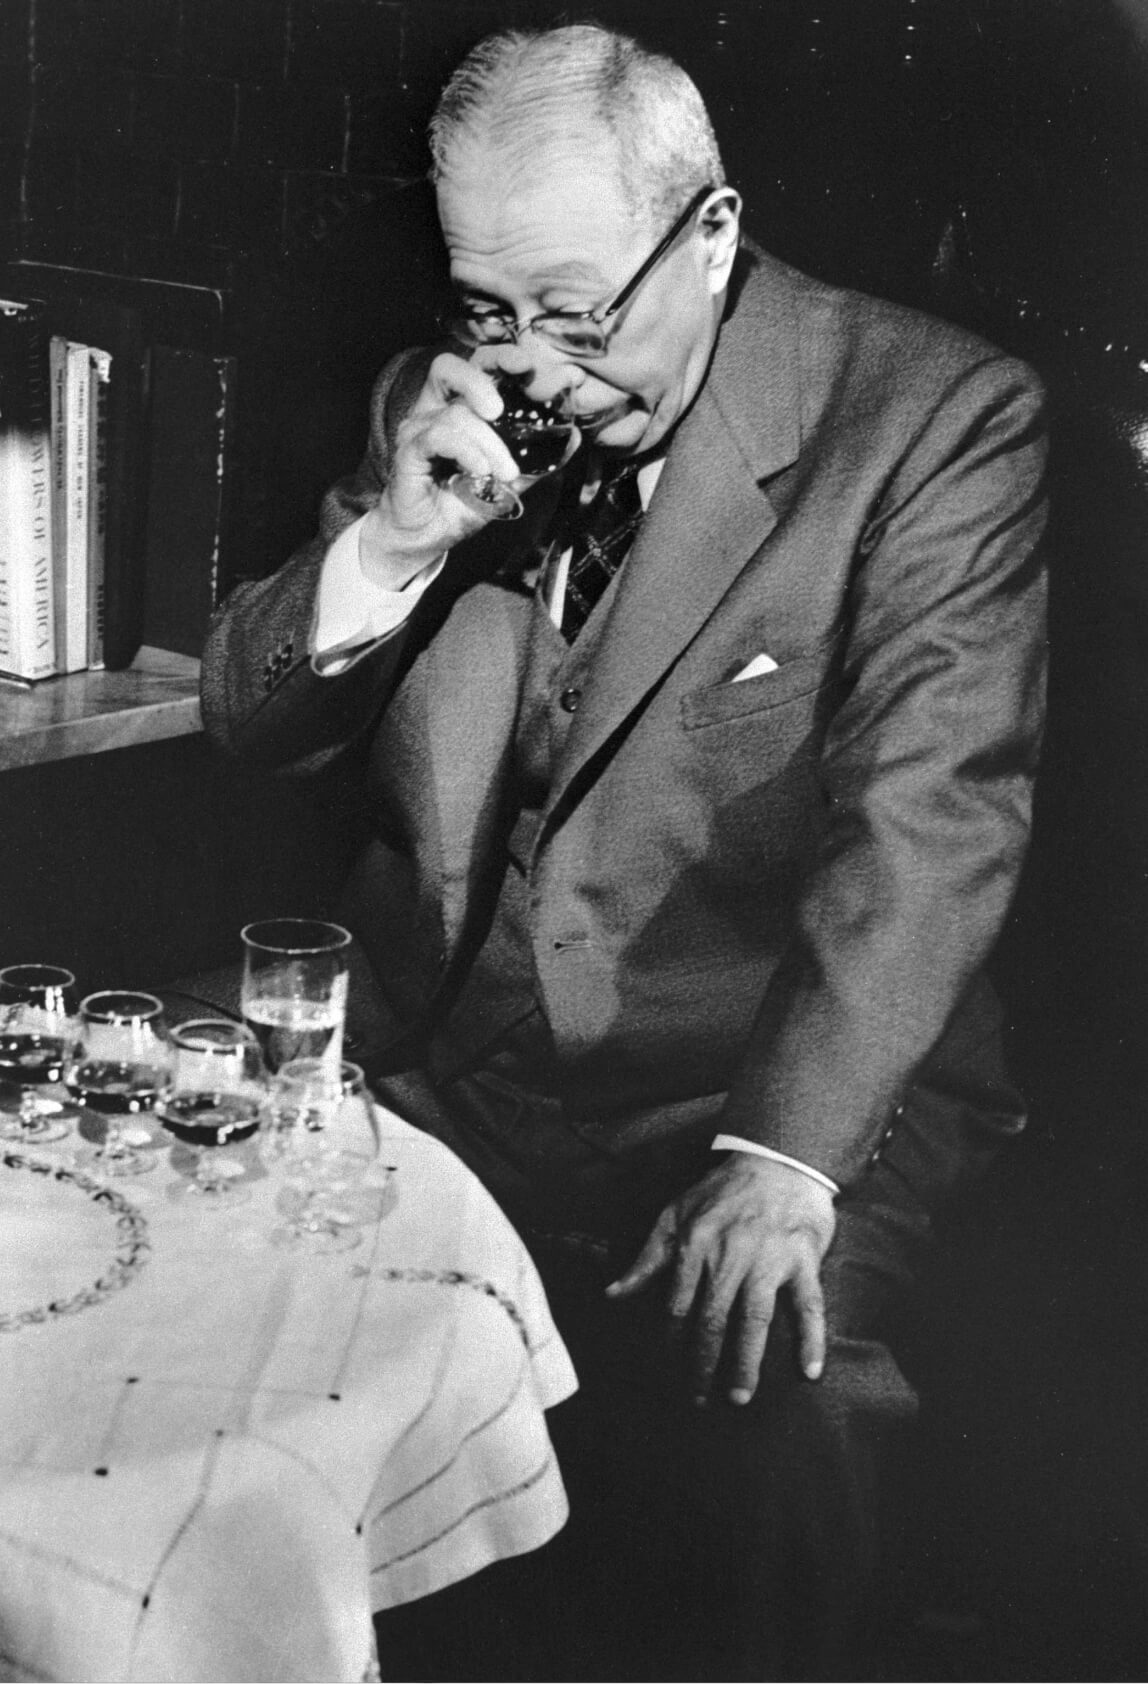 Photo of Suntory founder Shinjiro Torii, immersed in creating a whisky blend